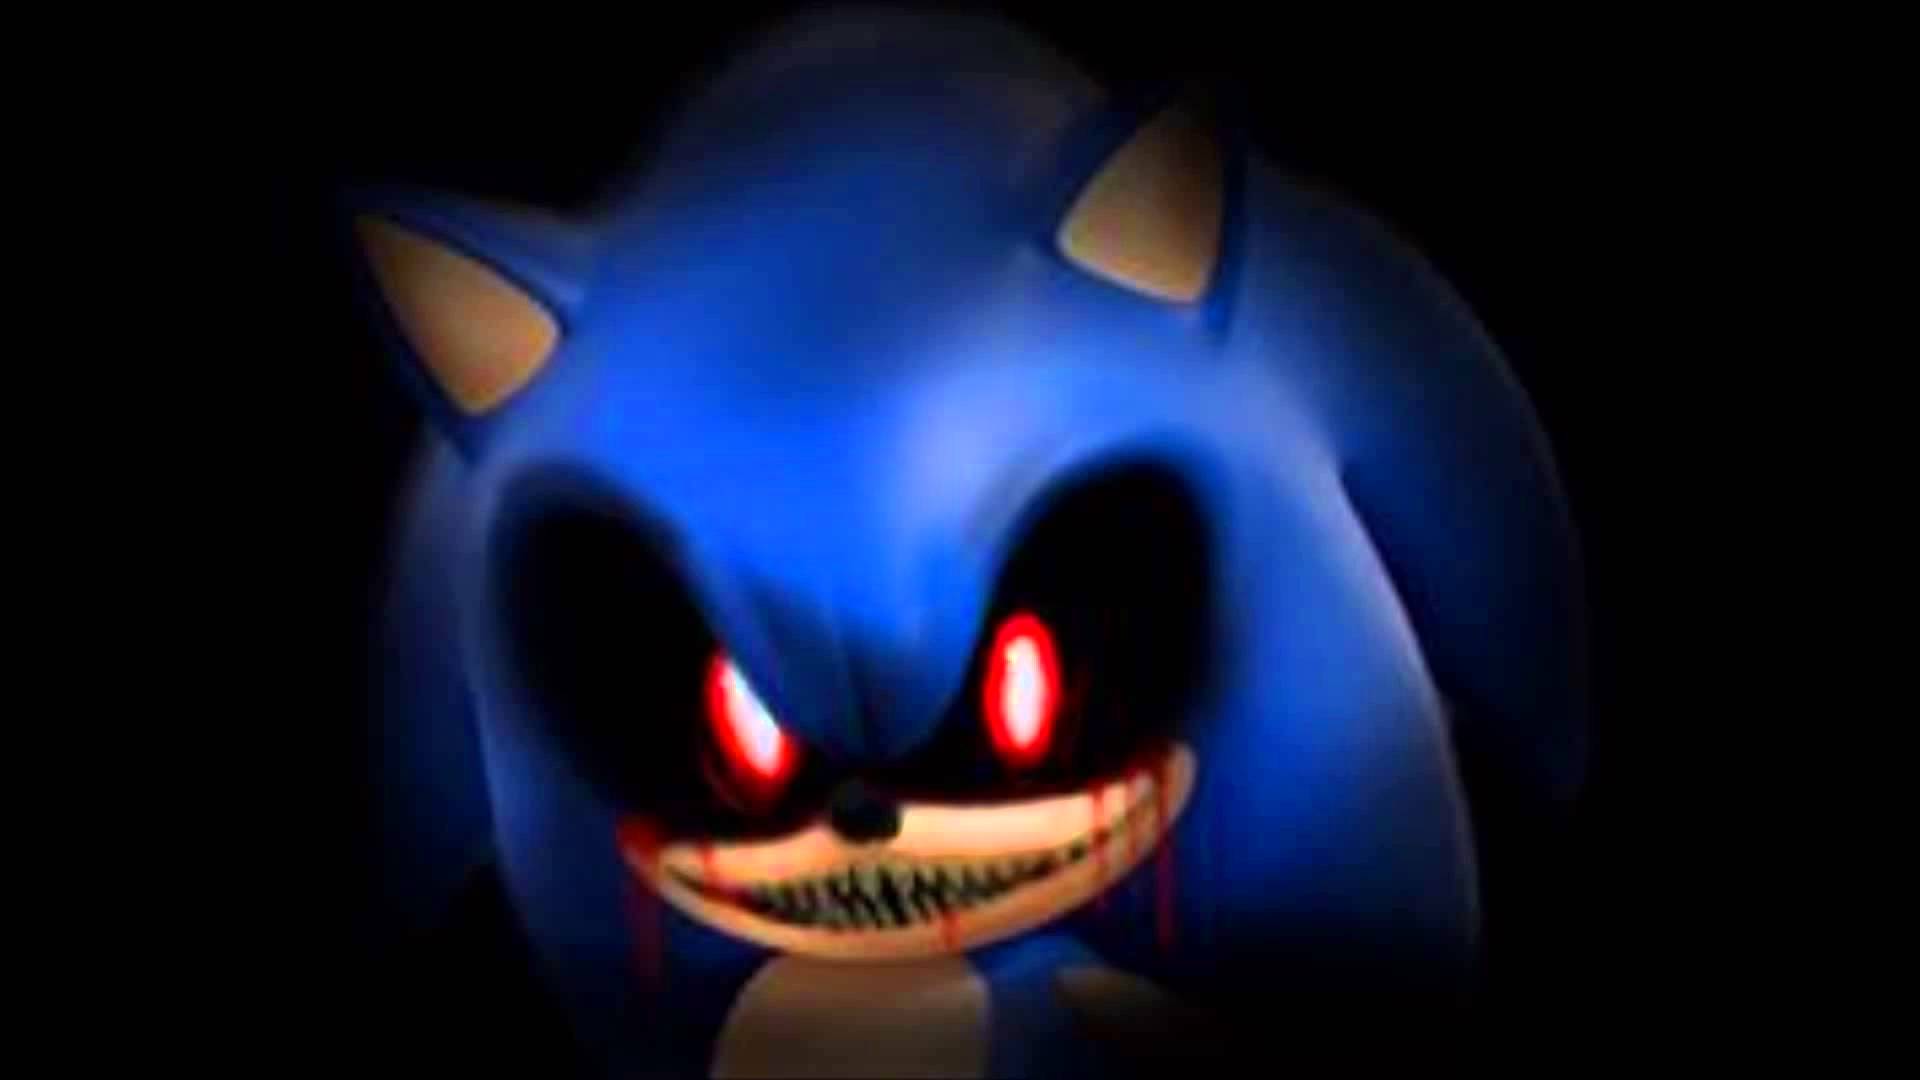 sonic exe download